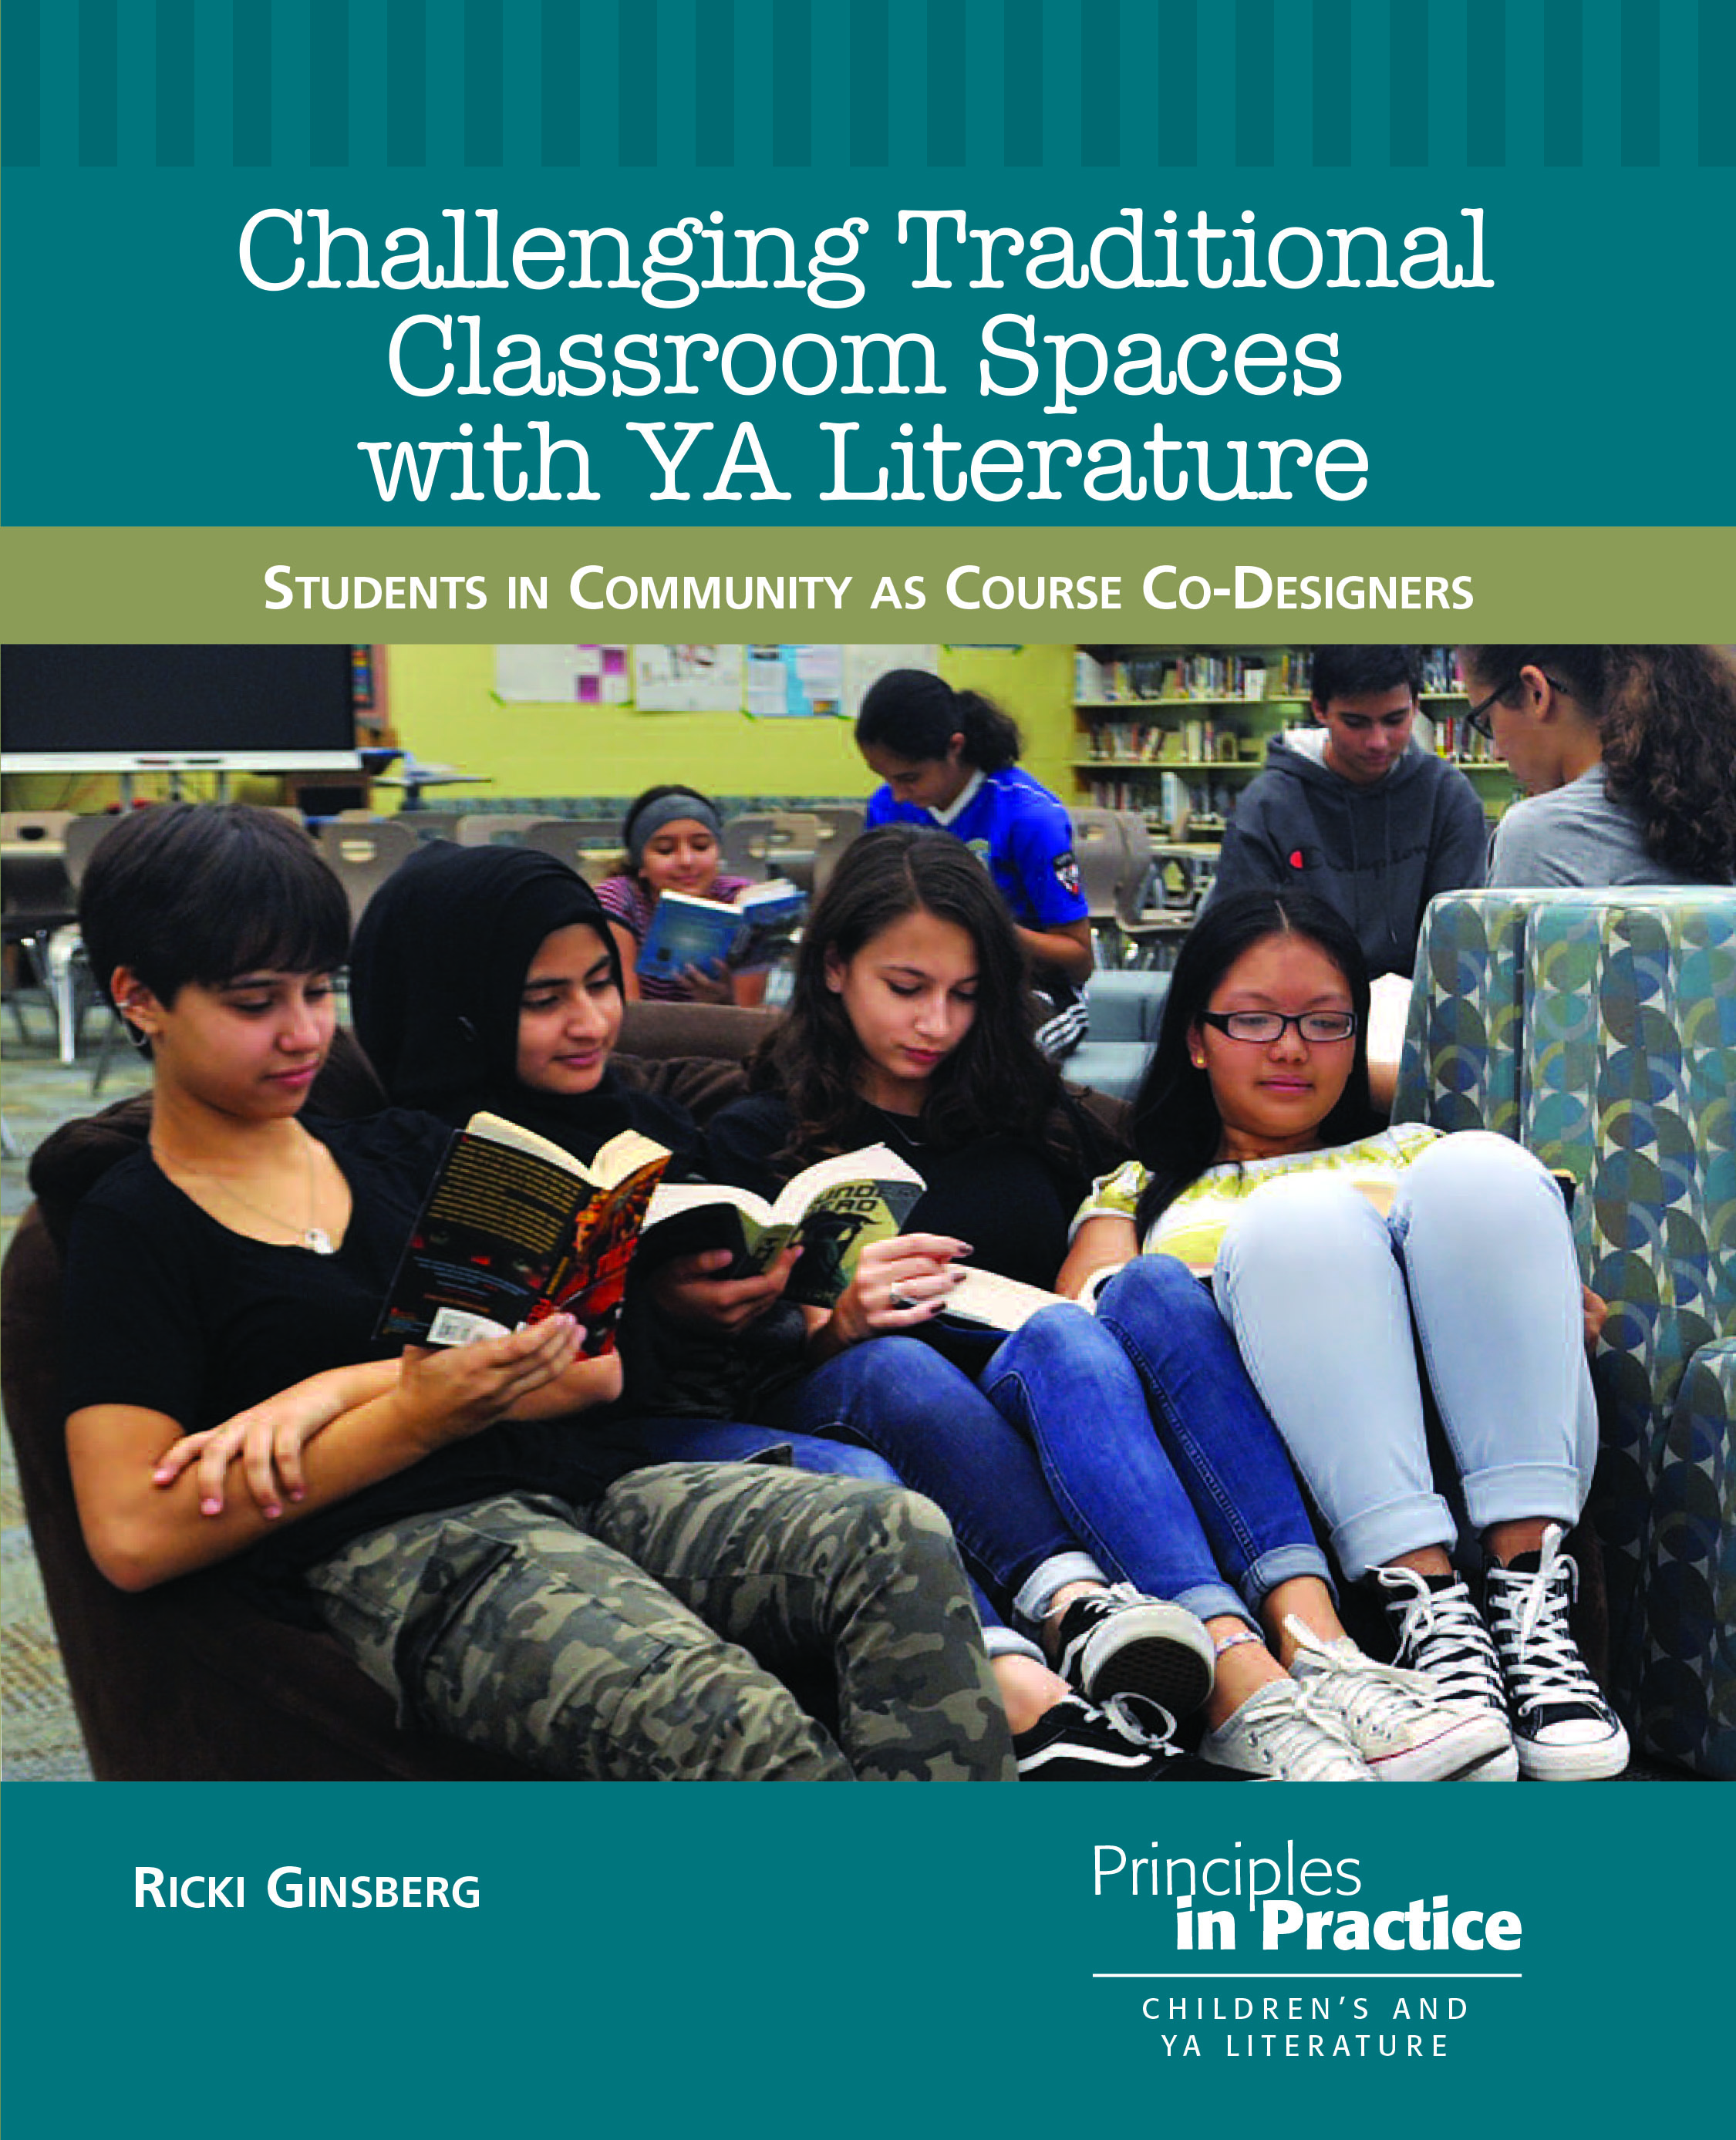 image of Challenging Traditional Classroom Spaces with Young Adult Literature